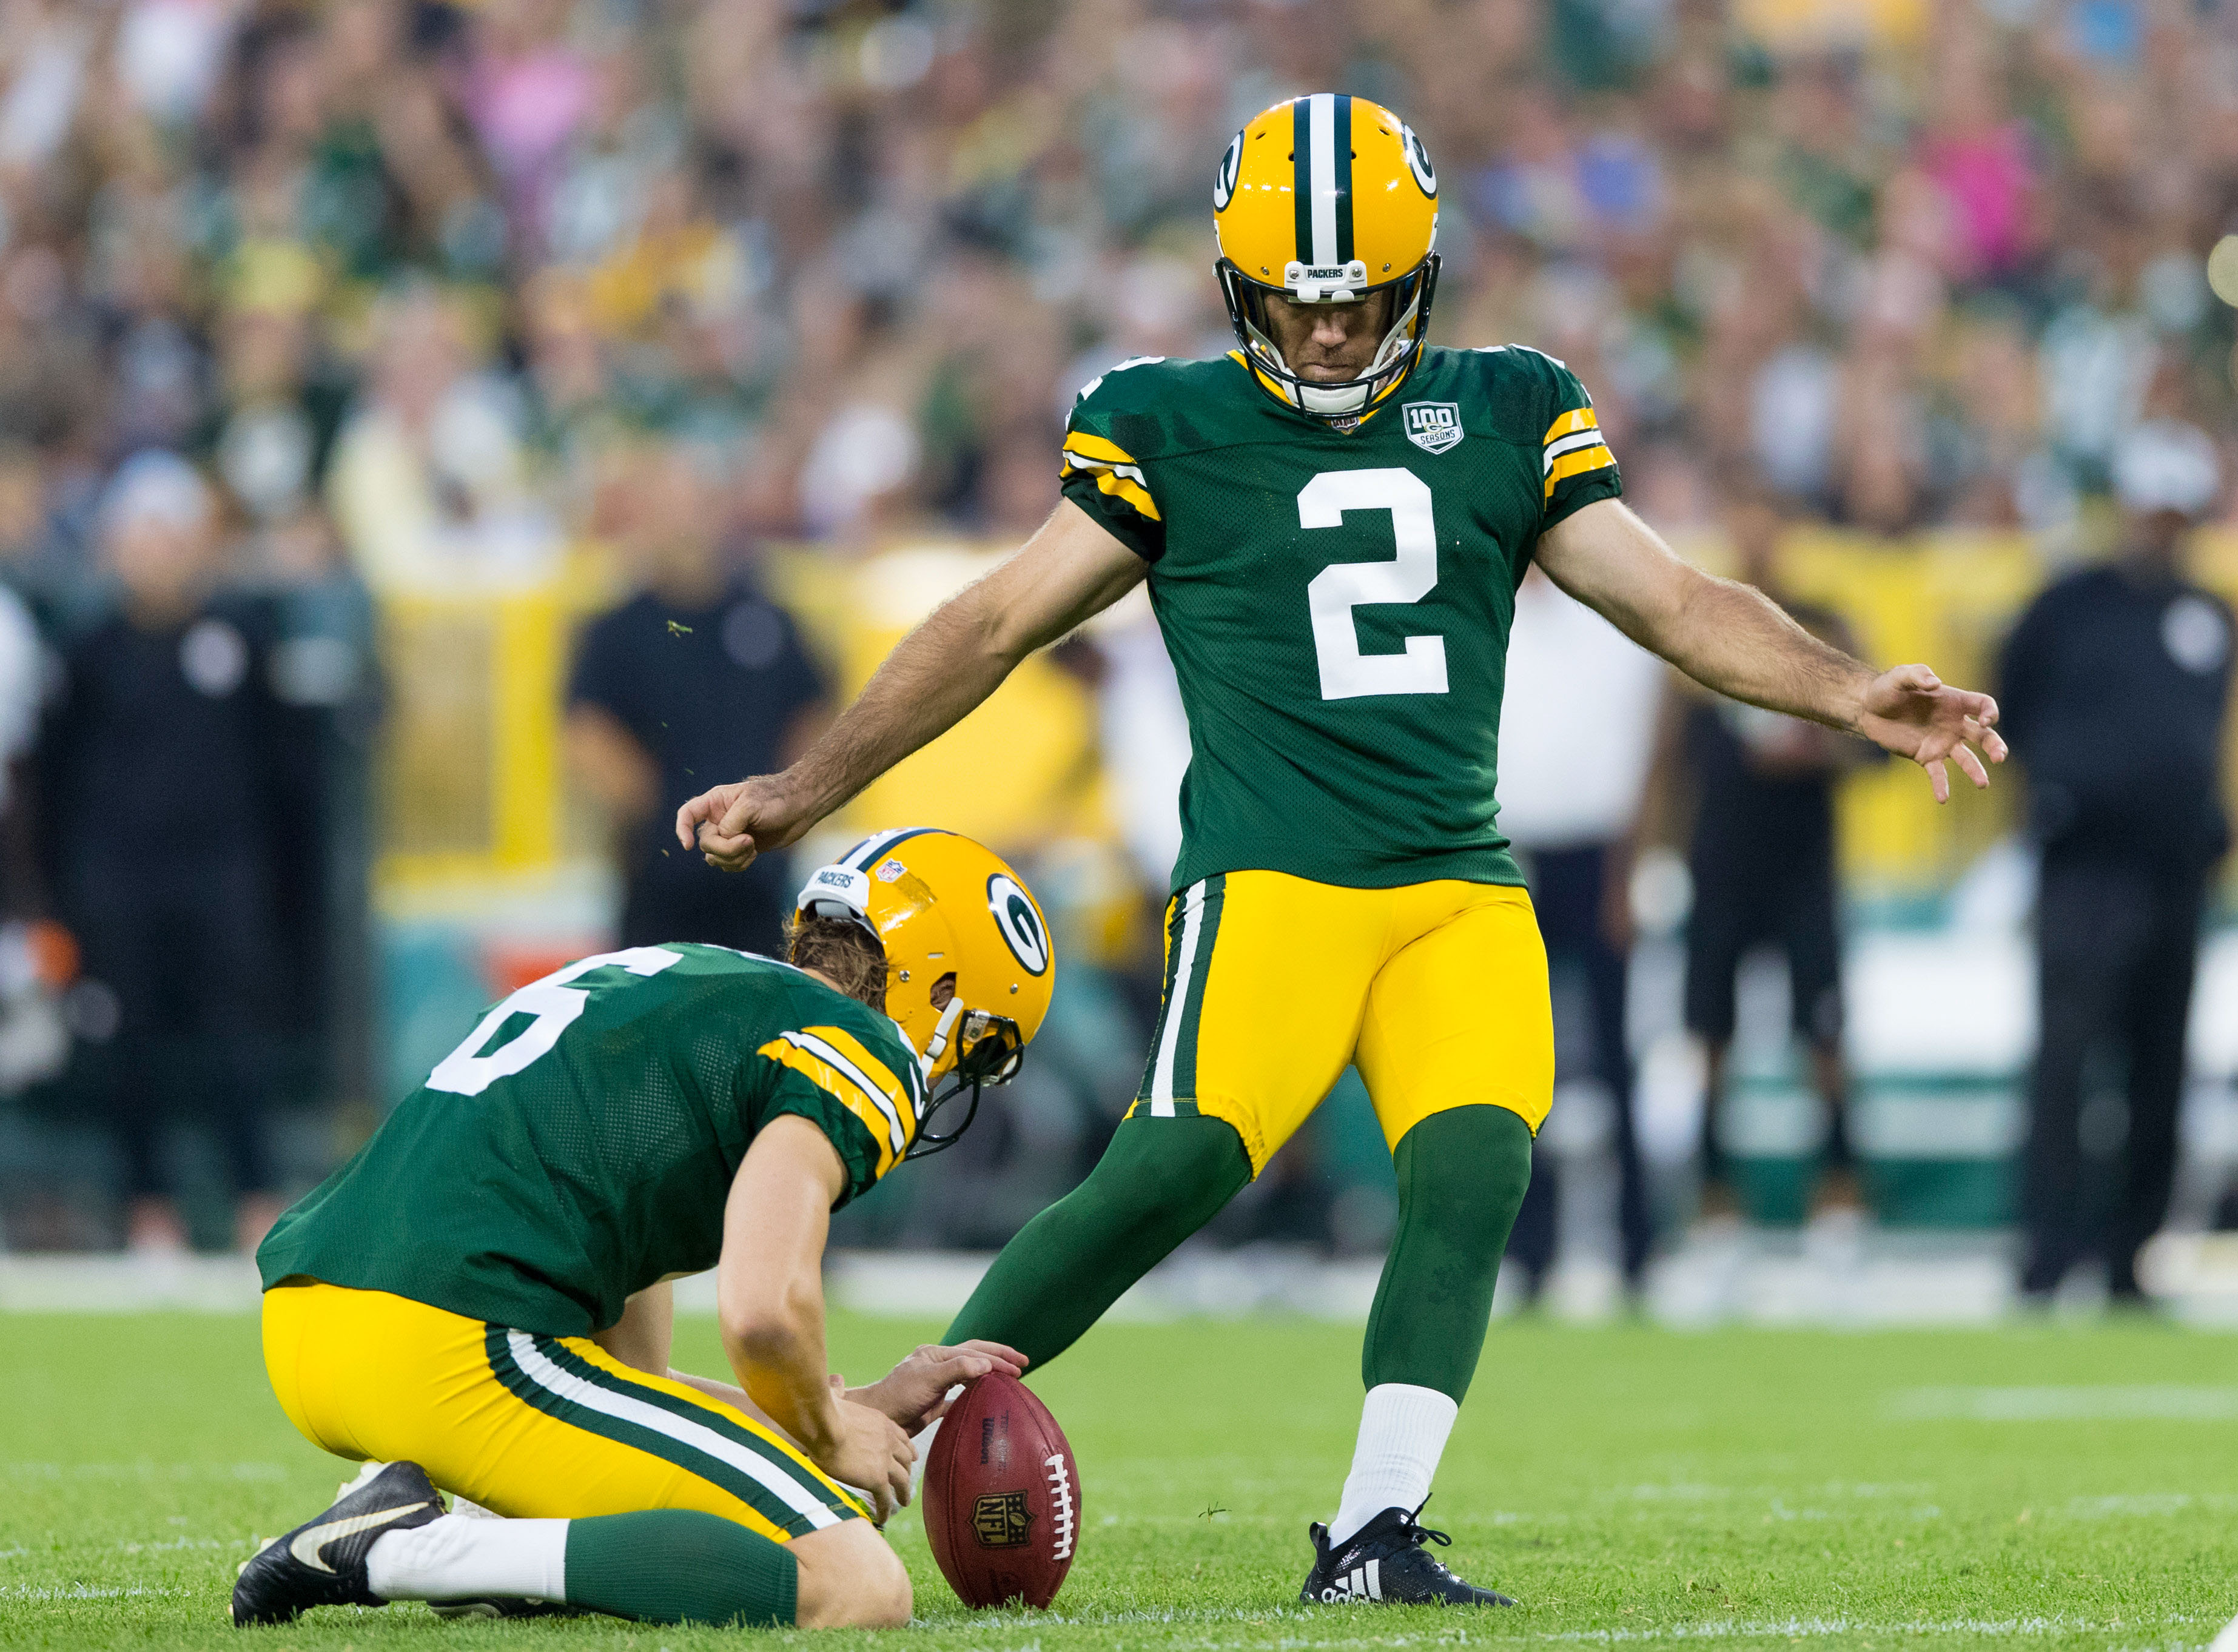 Mason Crosby had a procedure to clean out his knee this offseason